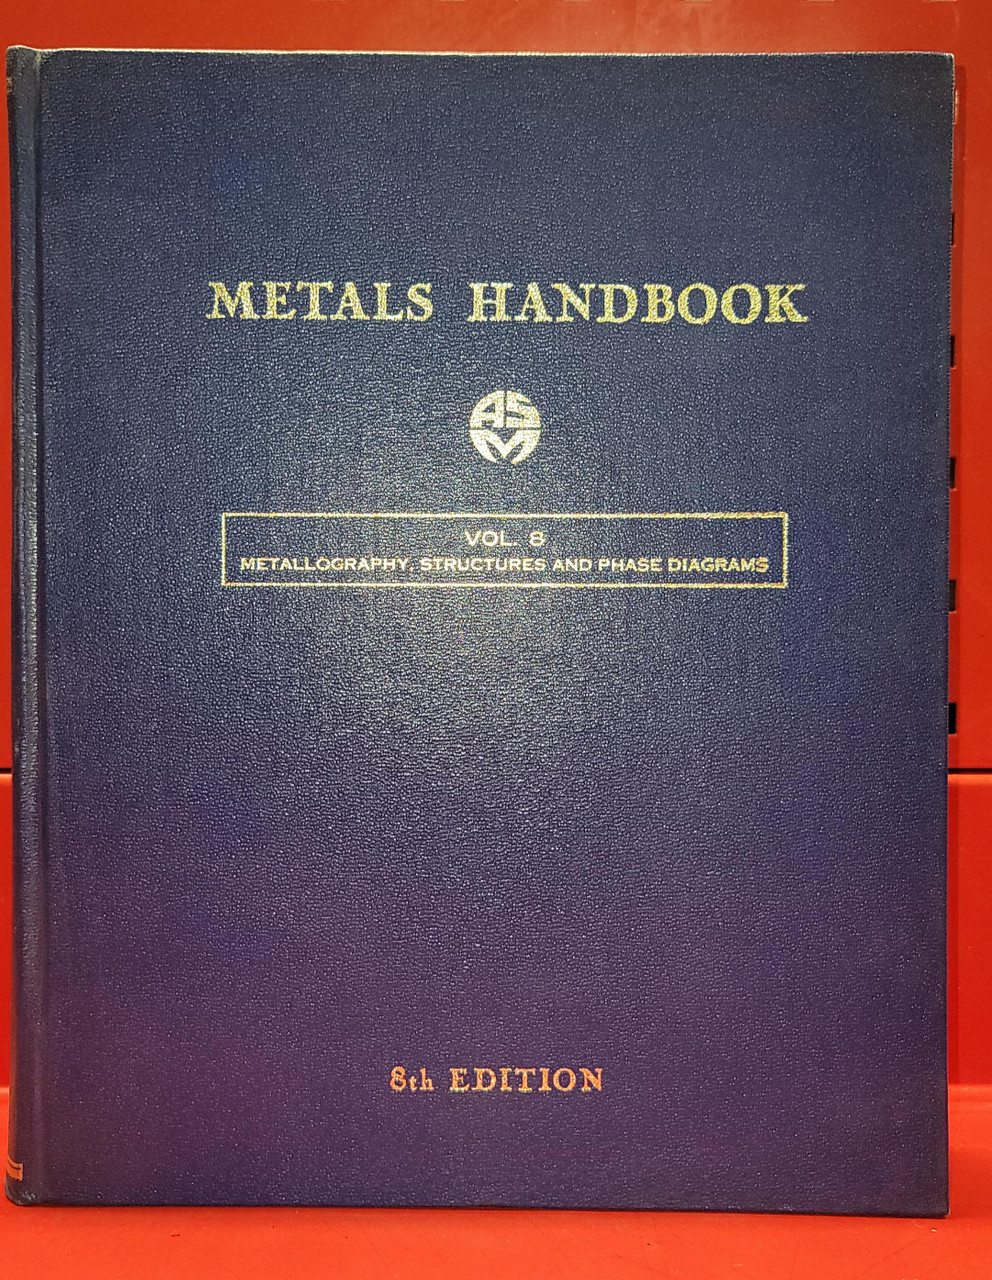 ASM Metals Handbook Volume 8 Metallography, Structures and Phase Diagrams. 8th Edition